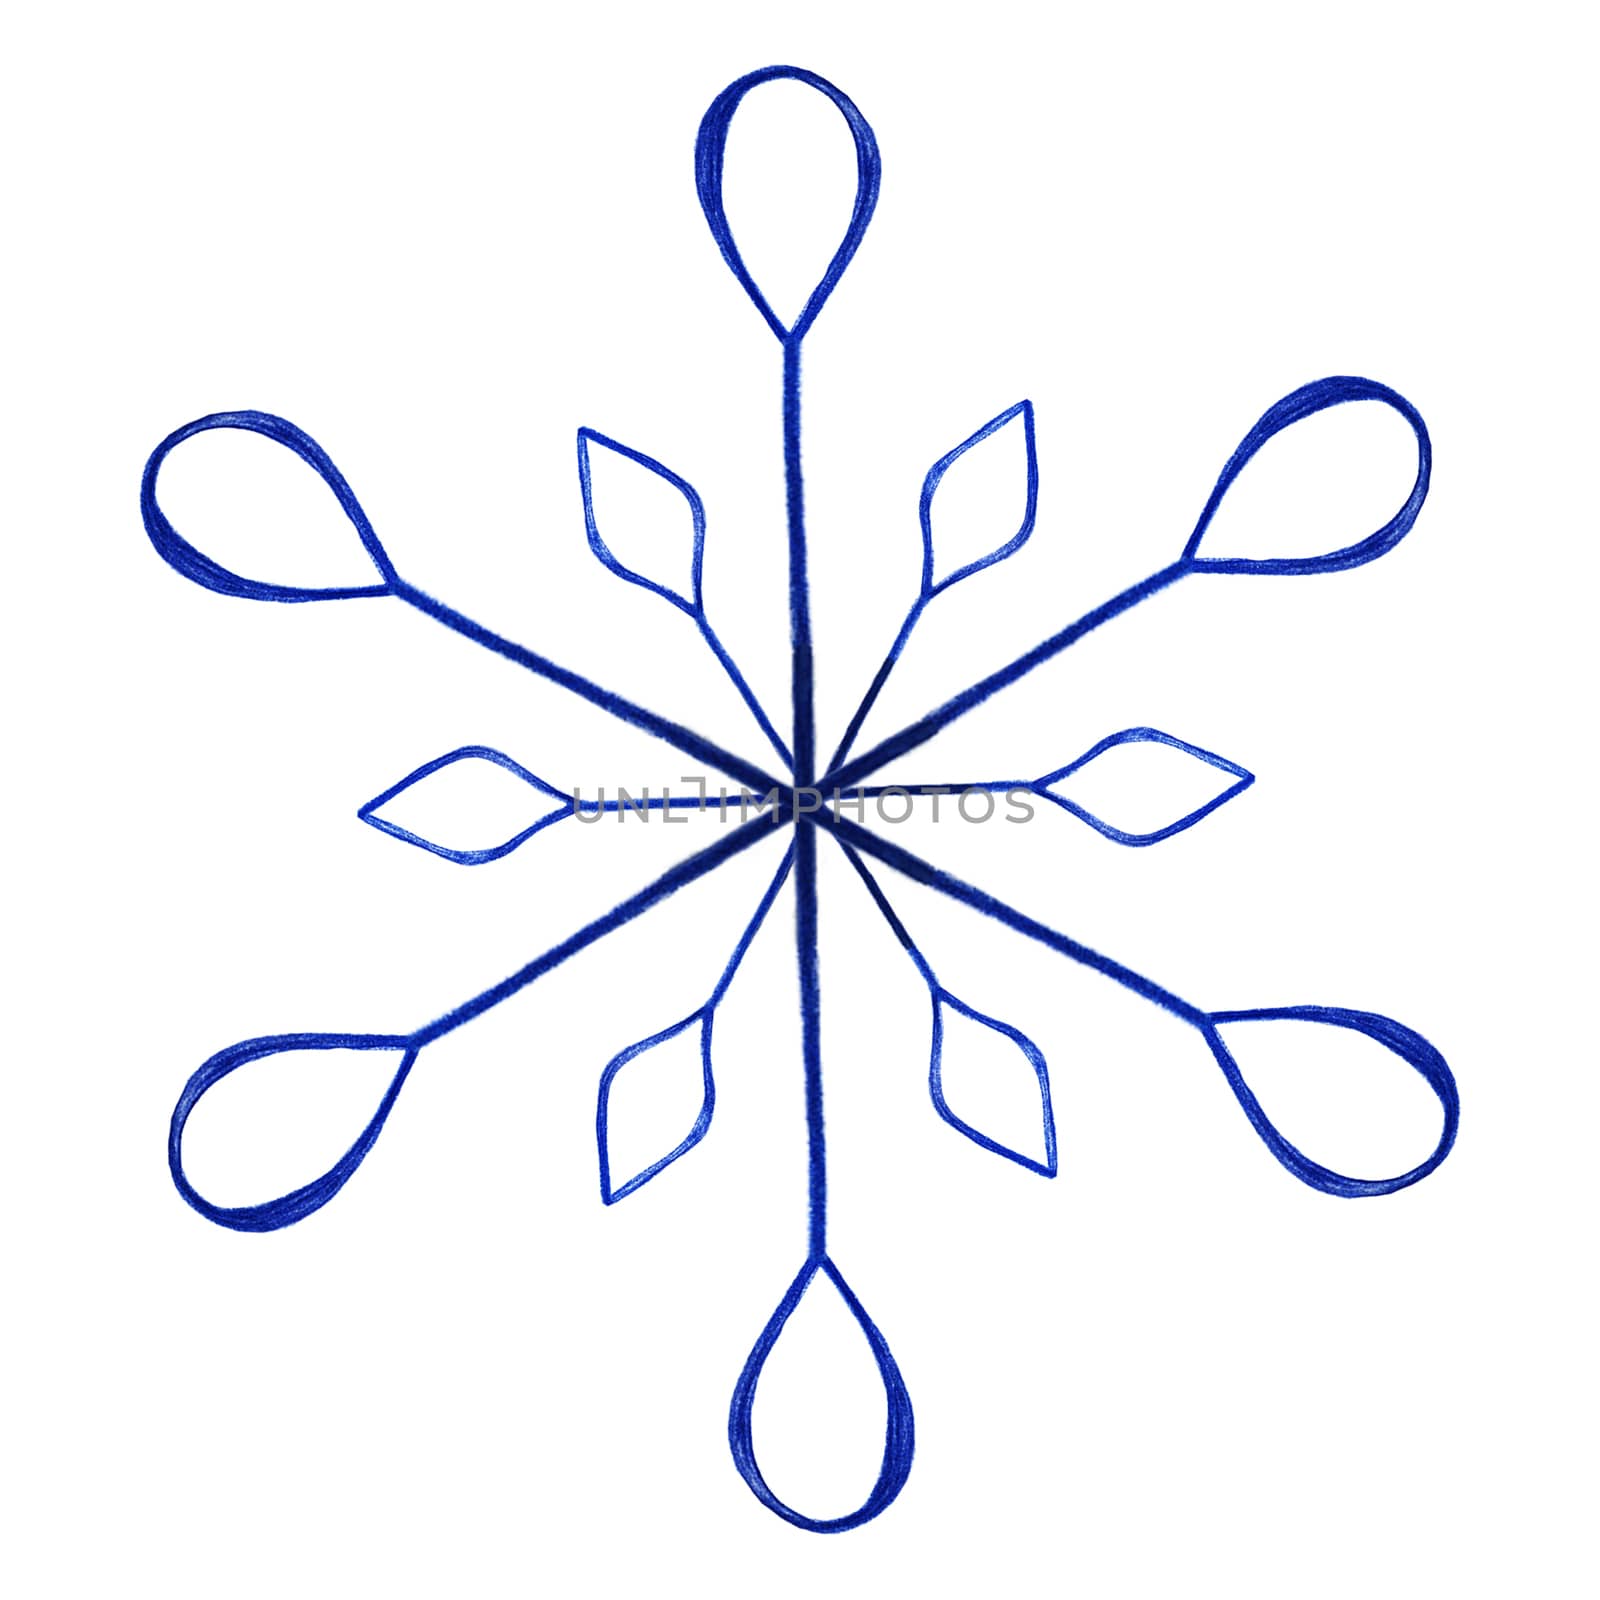 Blue Snowflake Isolated on White Background. Hand Drawn by Color Pencil. Winter Snow Symbol. Design elements for Christmas, New Year, card and other.